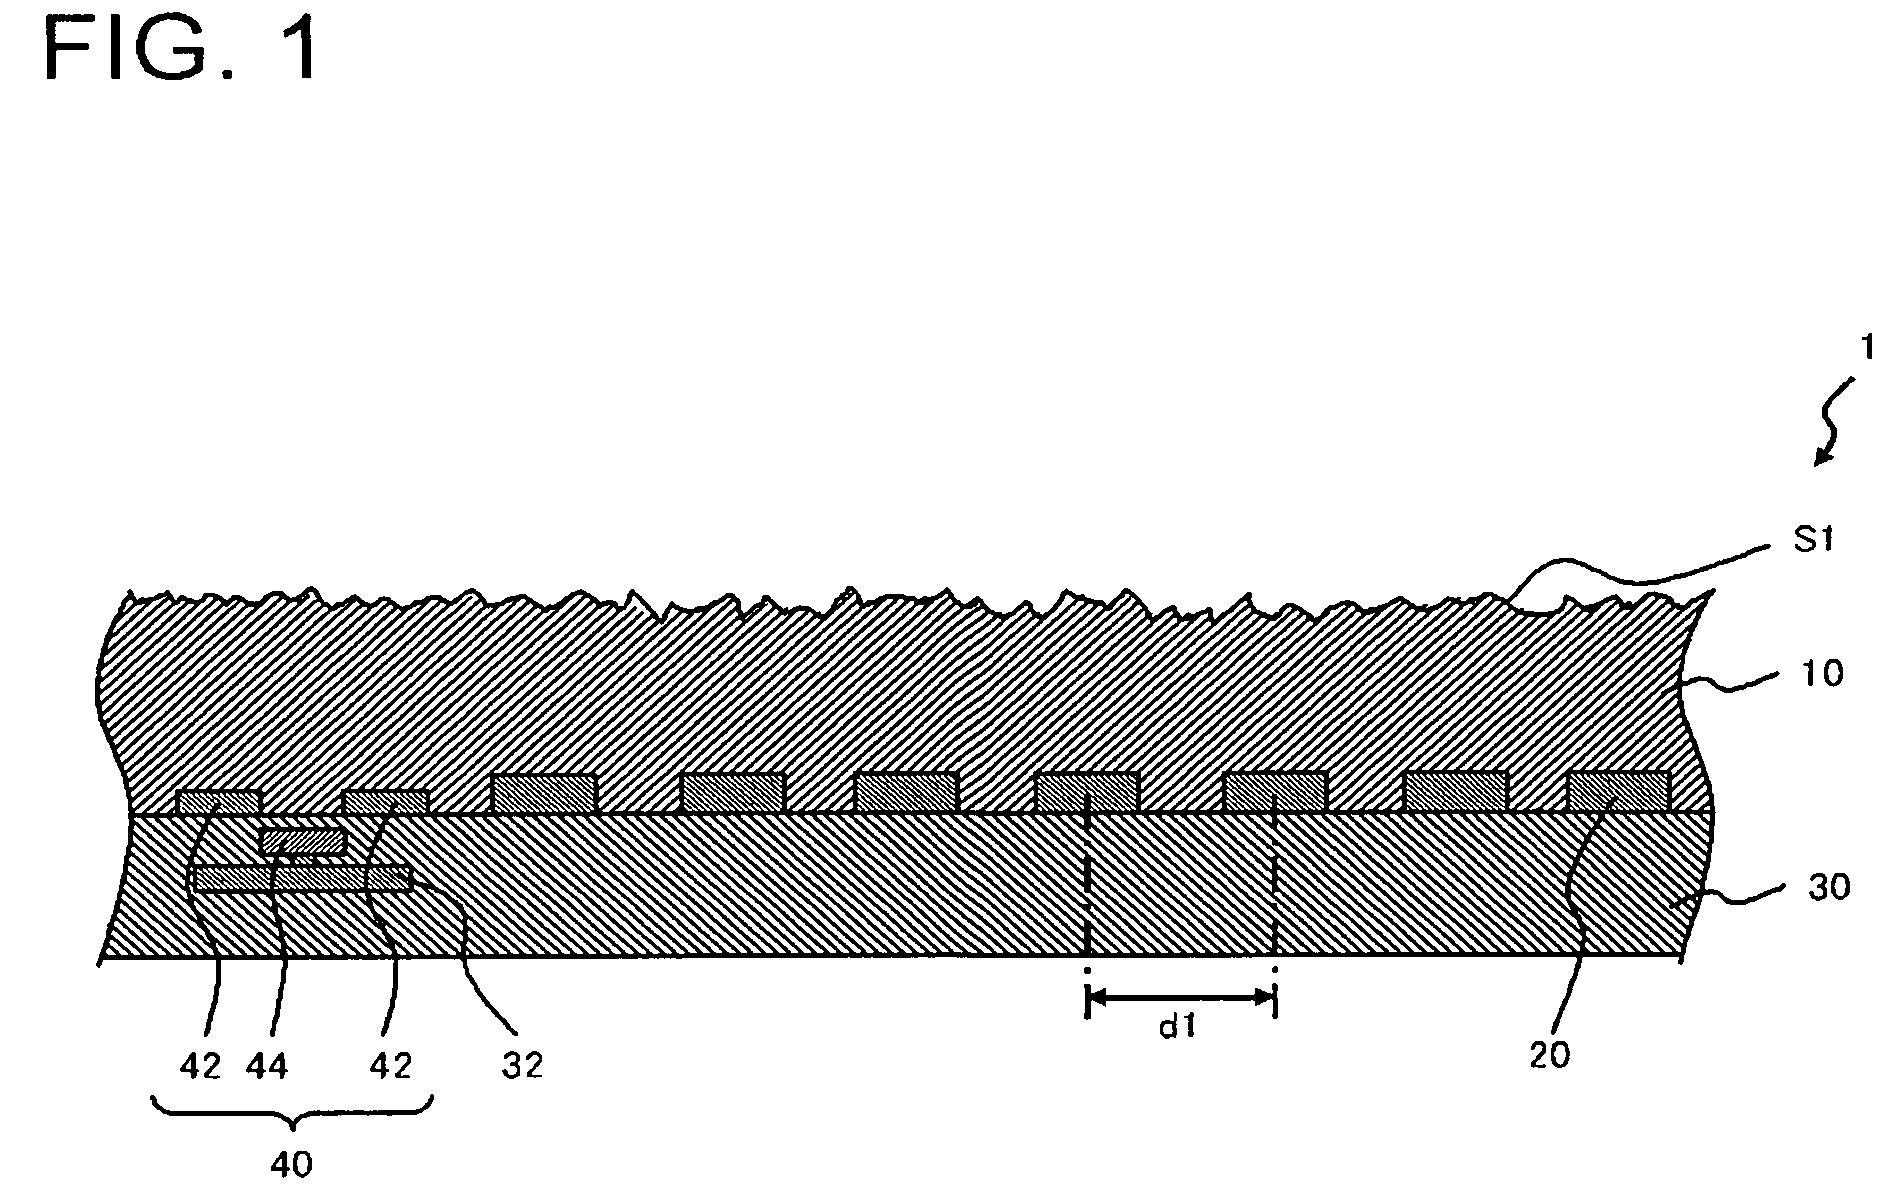 Solid state imaging device